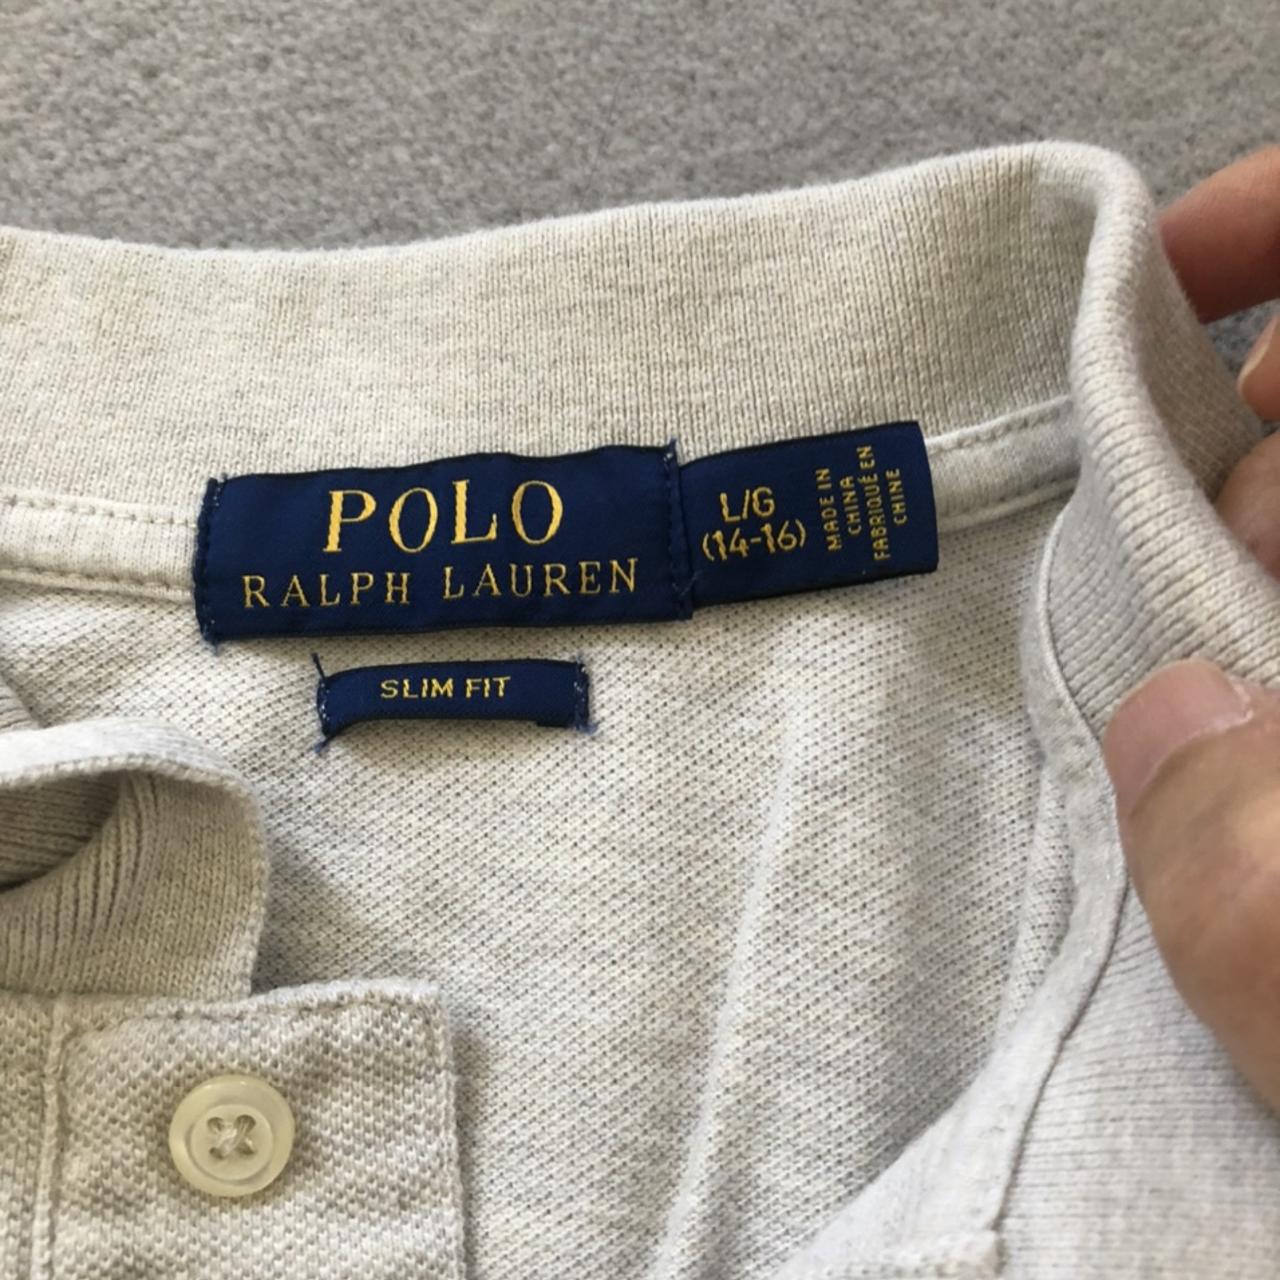 Polo Ralph Lauren classic slim fit Polo shirt in US... - Depop